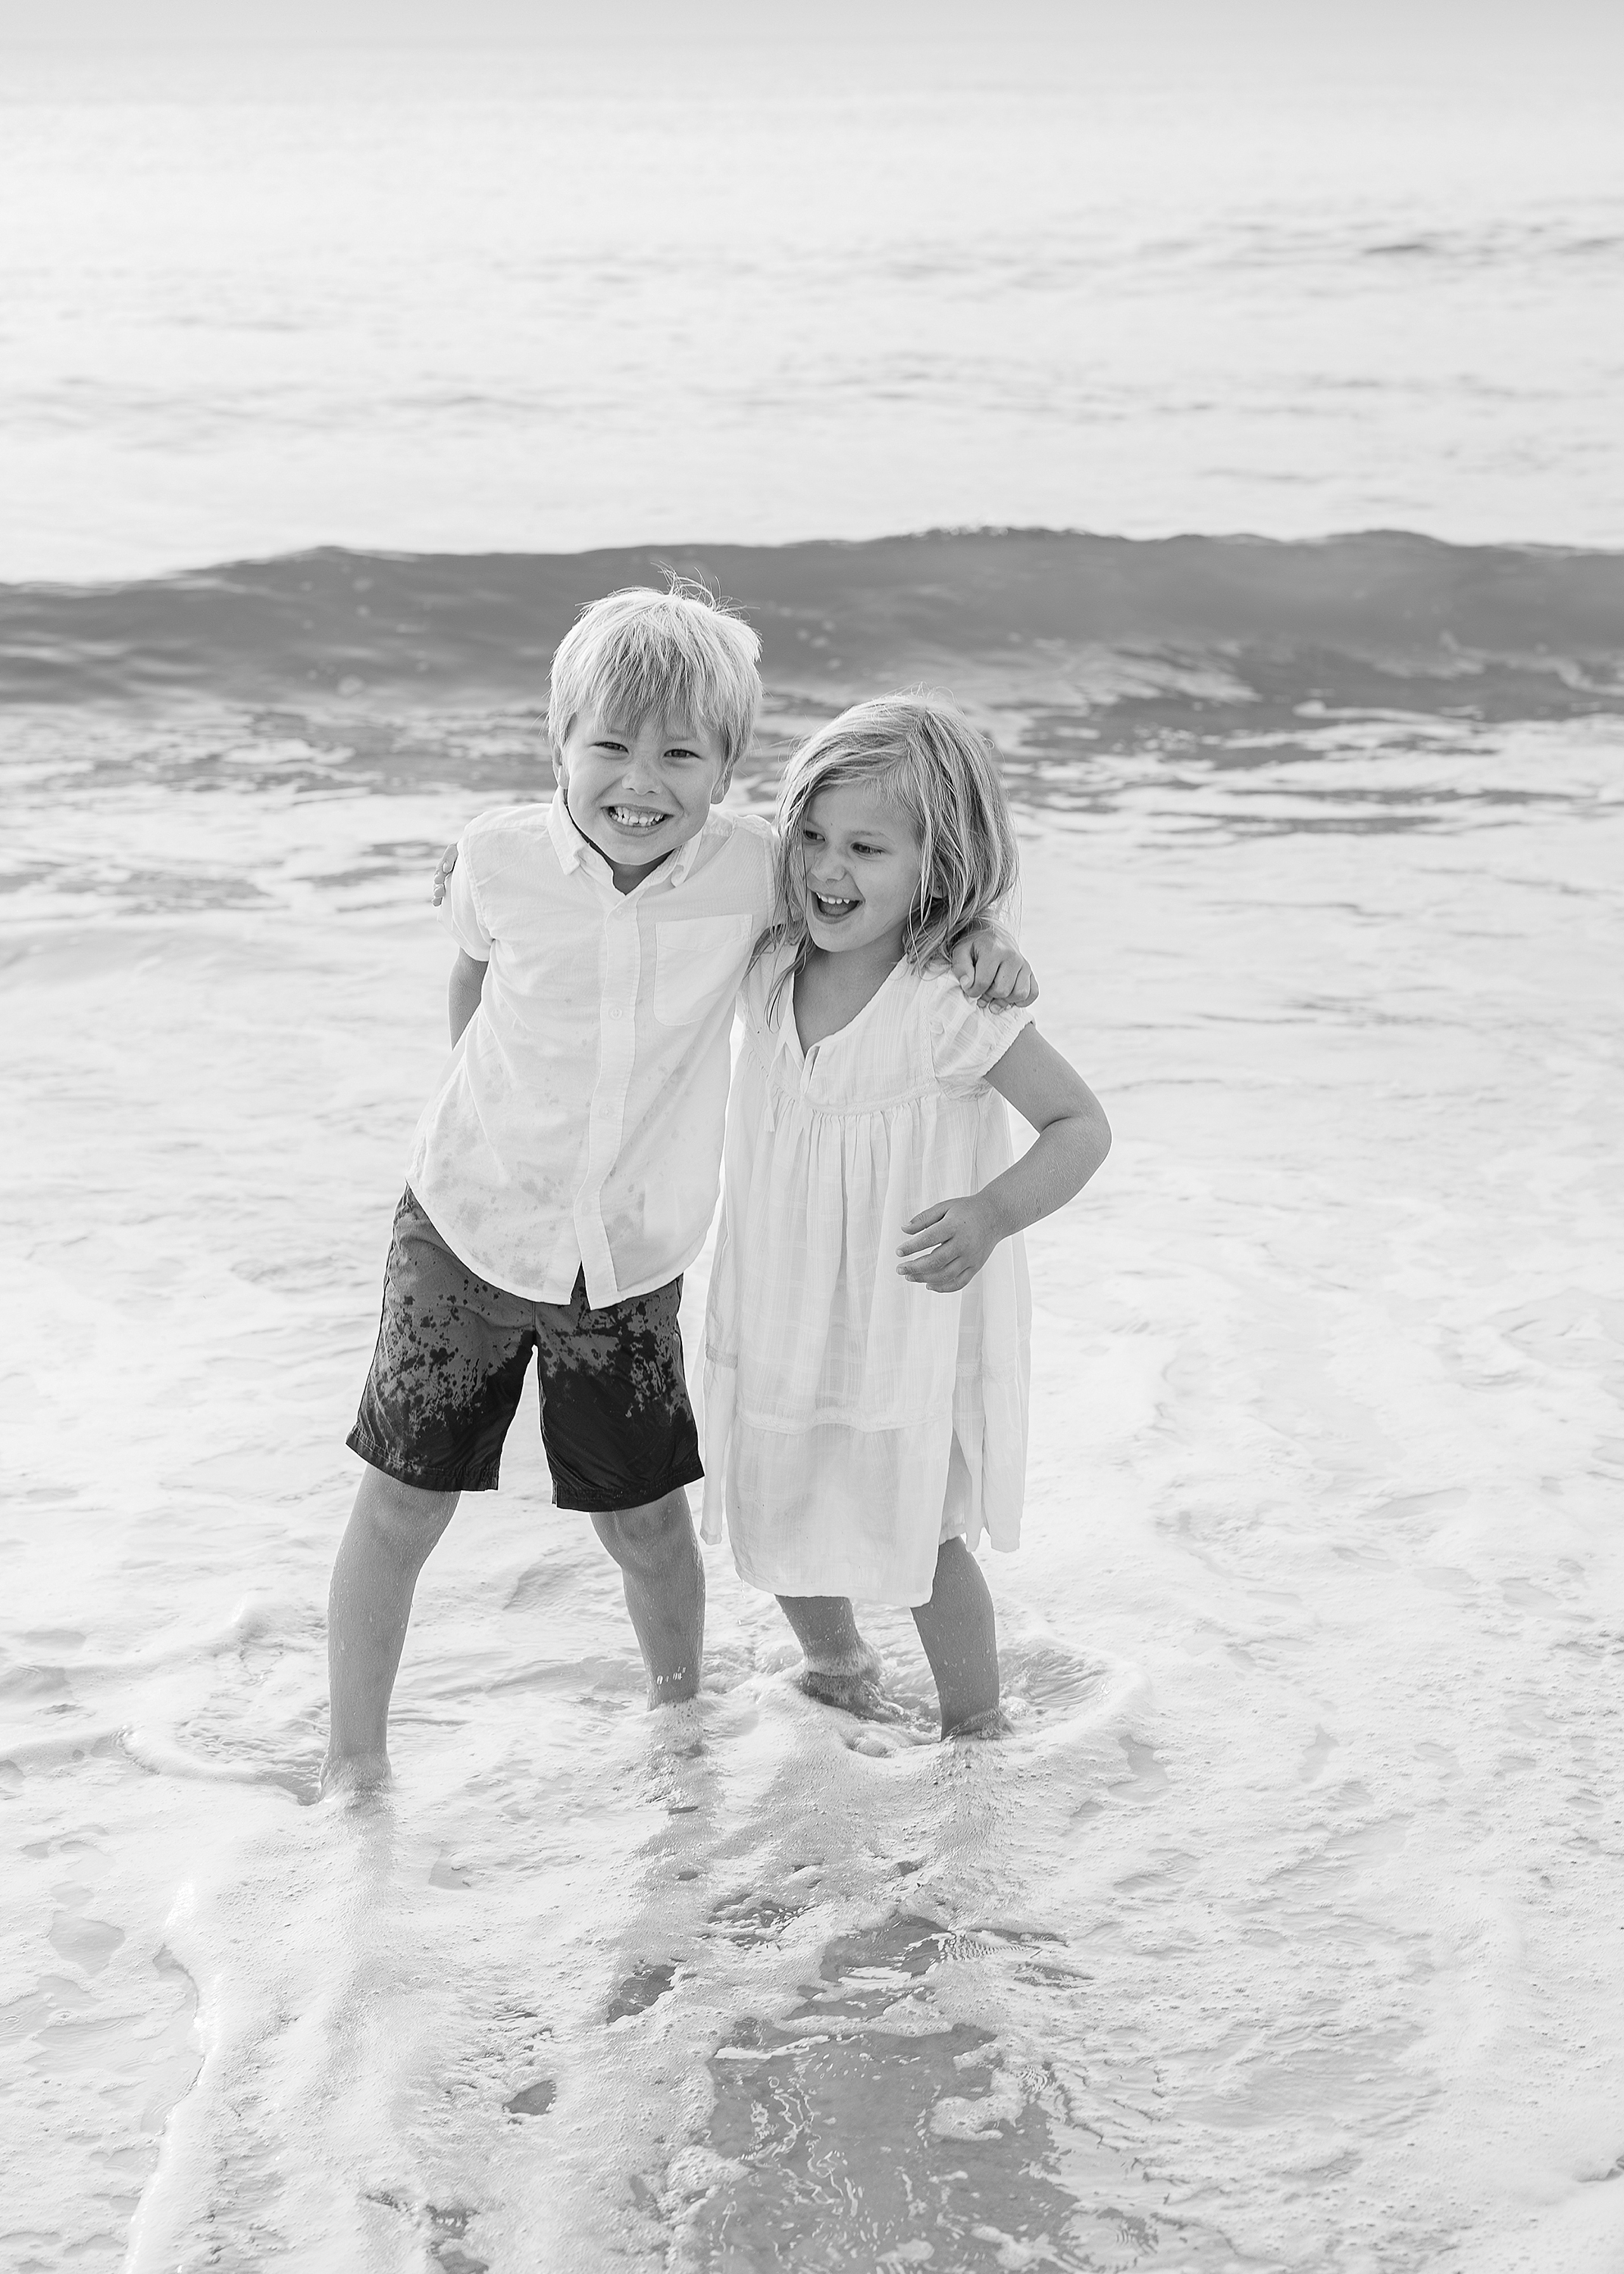 Airy black and white beach portrait of little children playing in the surf together.